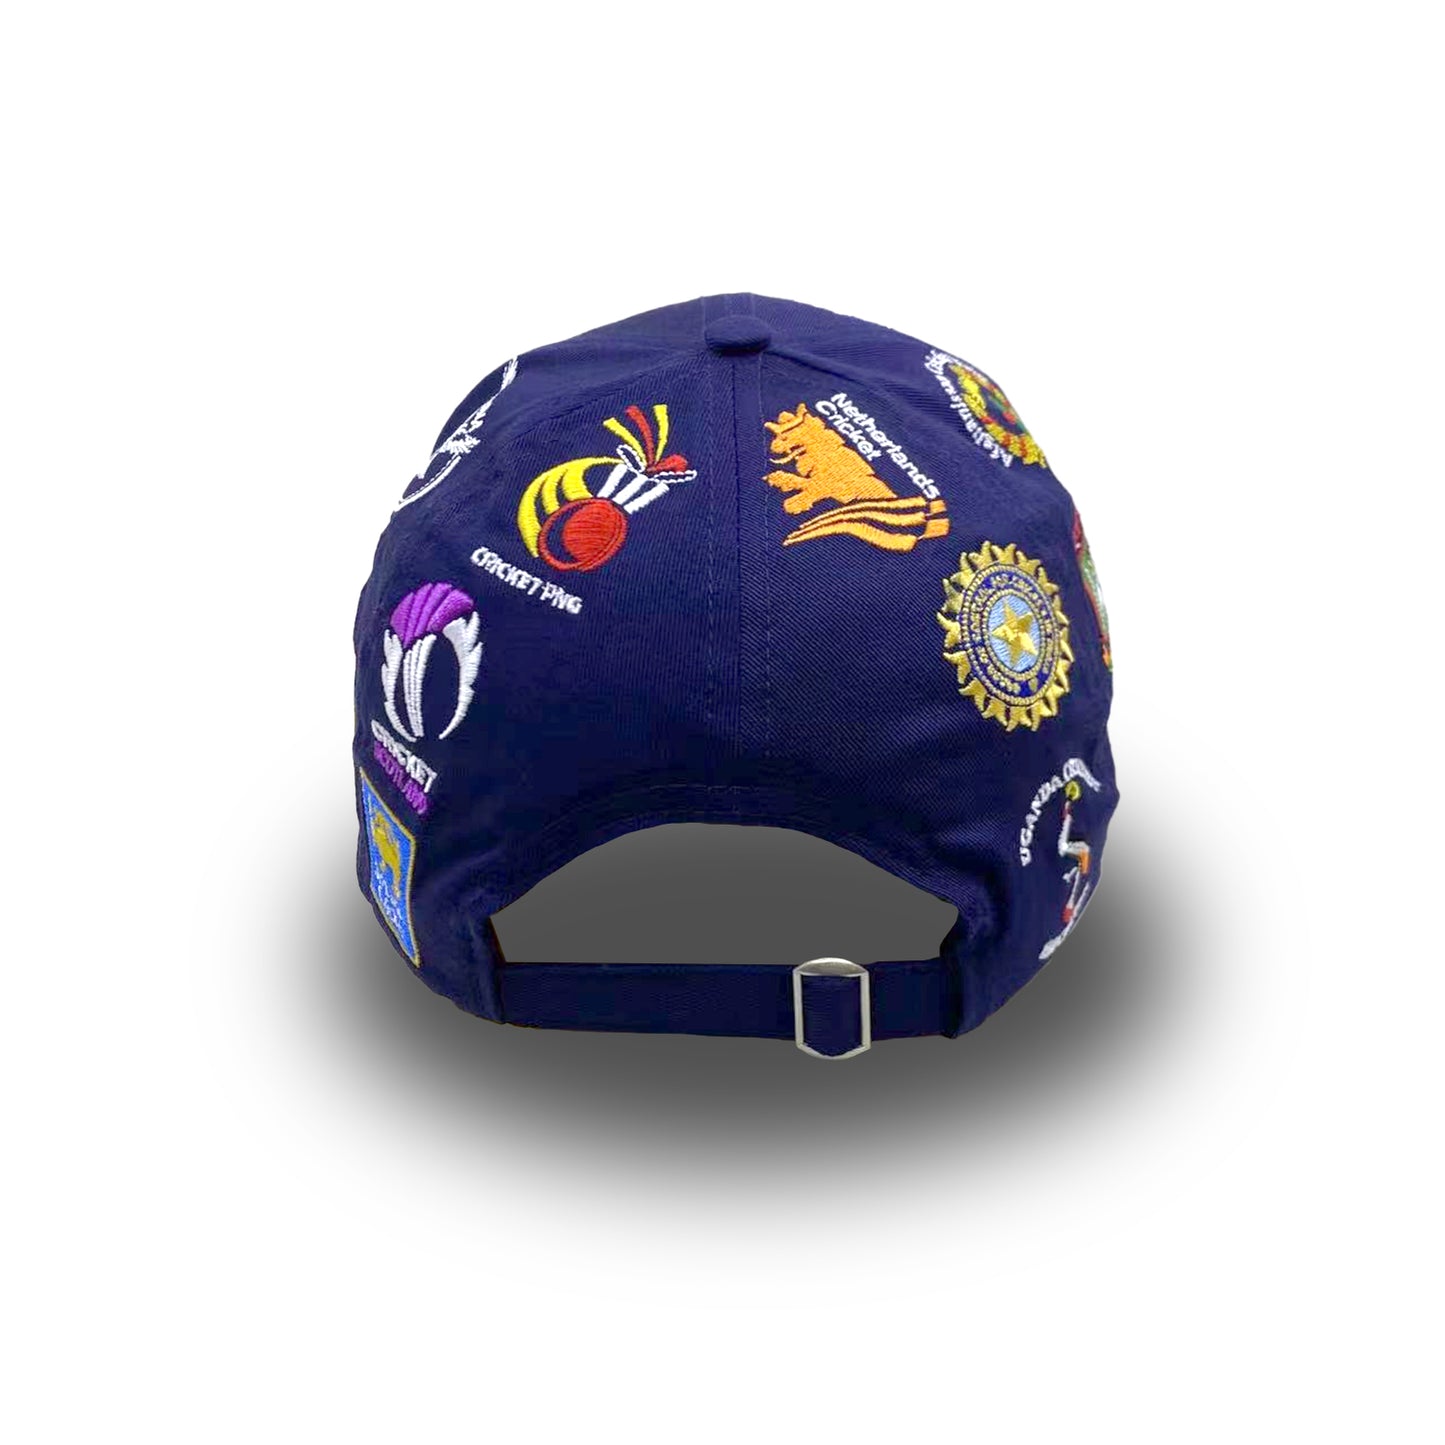 ICC T20 World Cup All Nations Navy Cap -  West Indies & USA